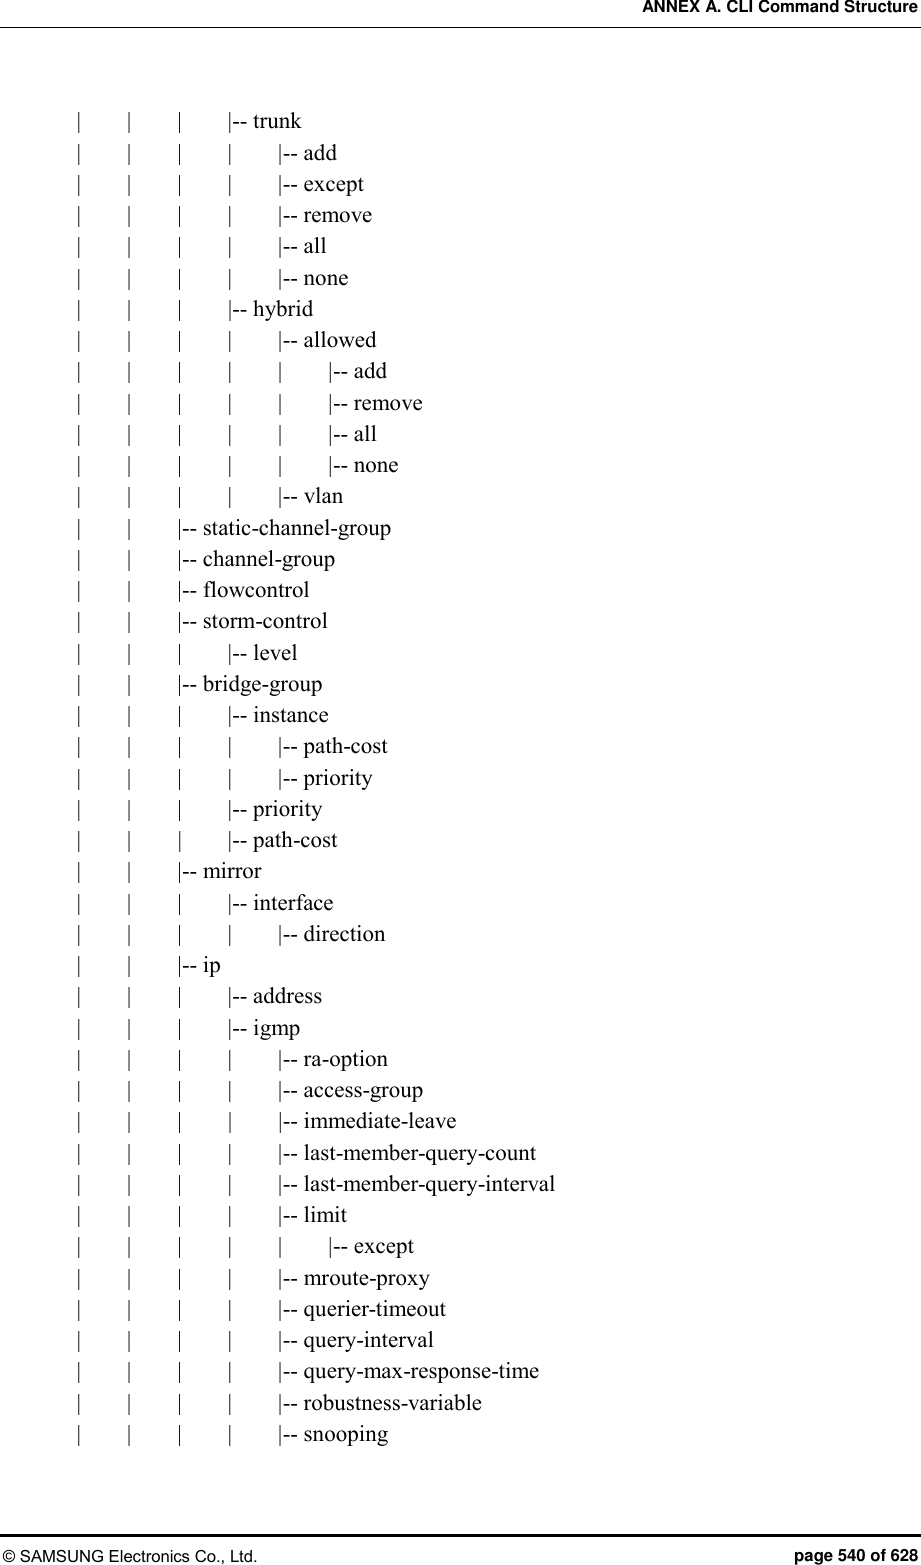 ANNEX A. CLI Command Structure © SAMSUNG Electronics Co., Ltd.  page 540 of 628 |        |        |        |-- trunk |        |        |        |        |-- add |        |        |        |        |-- except |        |        |        |        |-- remove |        |        |        |        |-- all |        |        |        |        |-- none |        |        |      |-- hybrid |        |        |        |        |-- allowed |        |        |        |        |        |-- add |        |        |        |        |        |-- remove |        |        |        |        |        |-- all |        |        |        |        |        |-- none |        |        |        |        |-- vlan |        |        |-- static-channel-group |        |        |-- channel-group |        |        |-- flowcontrol |        |        |-- storm-control |        |        |        |-- level |        |        |-- bridge-group |        |        |        |-- instance |        |        |        |        |-- path-cost |        |        |        |        |-- priority |        |        |        |-- priority |        |        |        |-- path-cost |        |        |-- mirror |        |        |        |-- interface |        |        |        |        |-- direction |        |        |-- ip |        |        |        |-- address |        |        |        |-- igmp |        |        |        |        |-- ra-option |        |        |        |        |-- access-group |        |        |        |        |-- immediate-leave |        |        |        |        |-- last-member-query-count |        |        |        |        |-- last-member-query-interval |        |        |        |        |-- limit |        |        |        |        |        |-- except |        |        |        |        |-- mroute-proxy |        |        |        |        |-- querier-timeout |        |        |        |        |-- query-interval |        |        |        |        |-- query-max-response-time |        |        |        |        |-- robustness-variable |        |        |        |        |-- snooping 